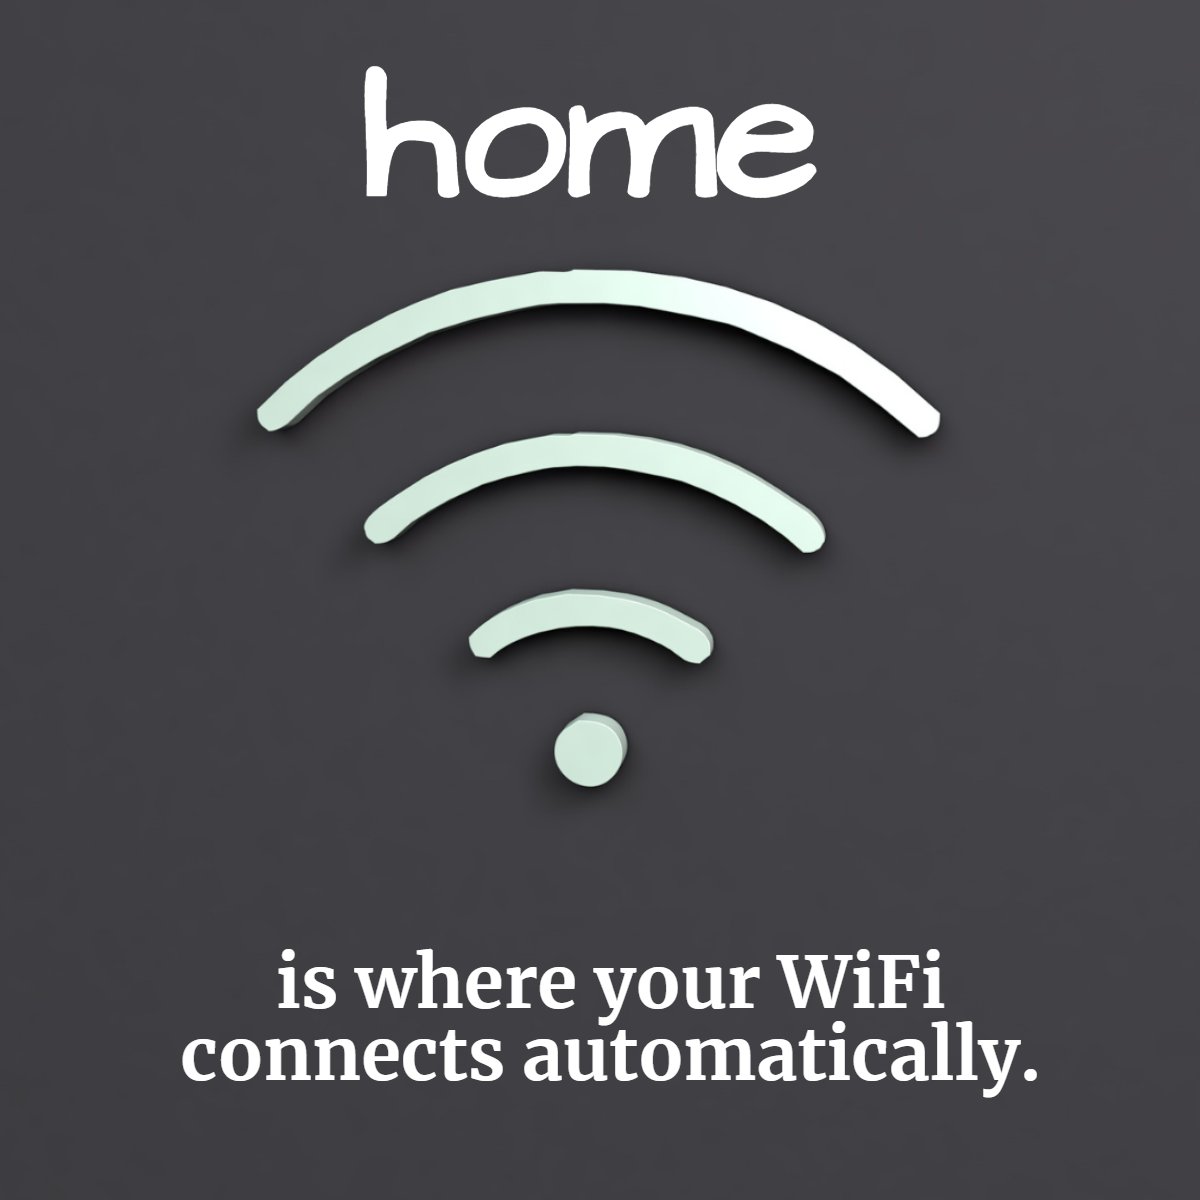 Home is where your WiFi... Connects automatically. 📱📶

#home #wifi #stayhome #homestyle #hometime #homesofinstagram #wearehome